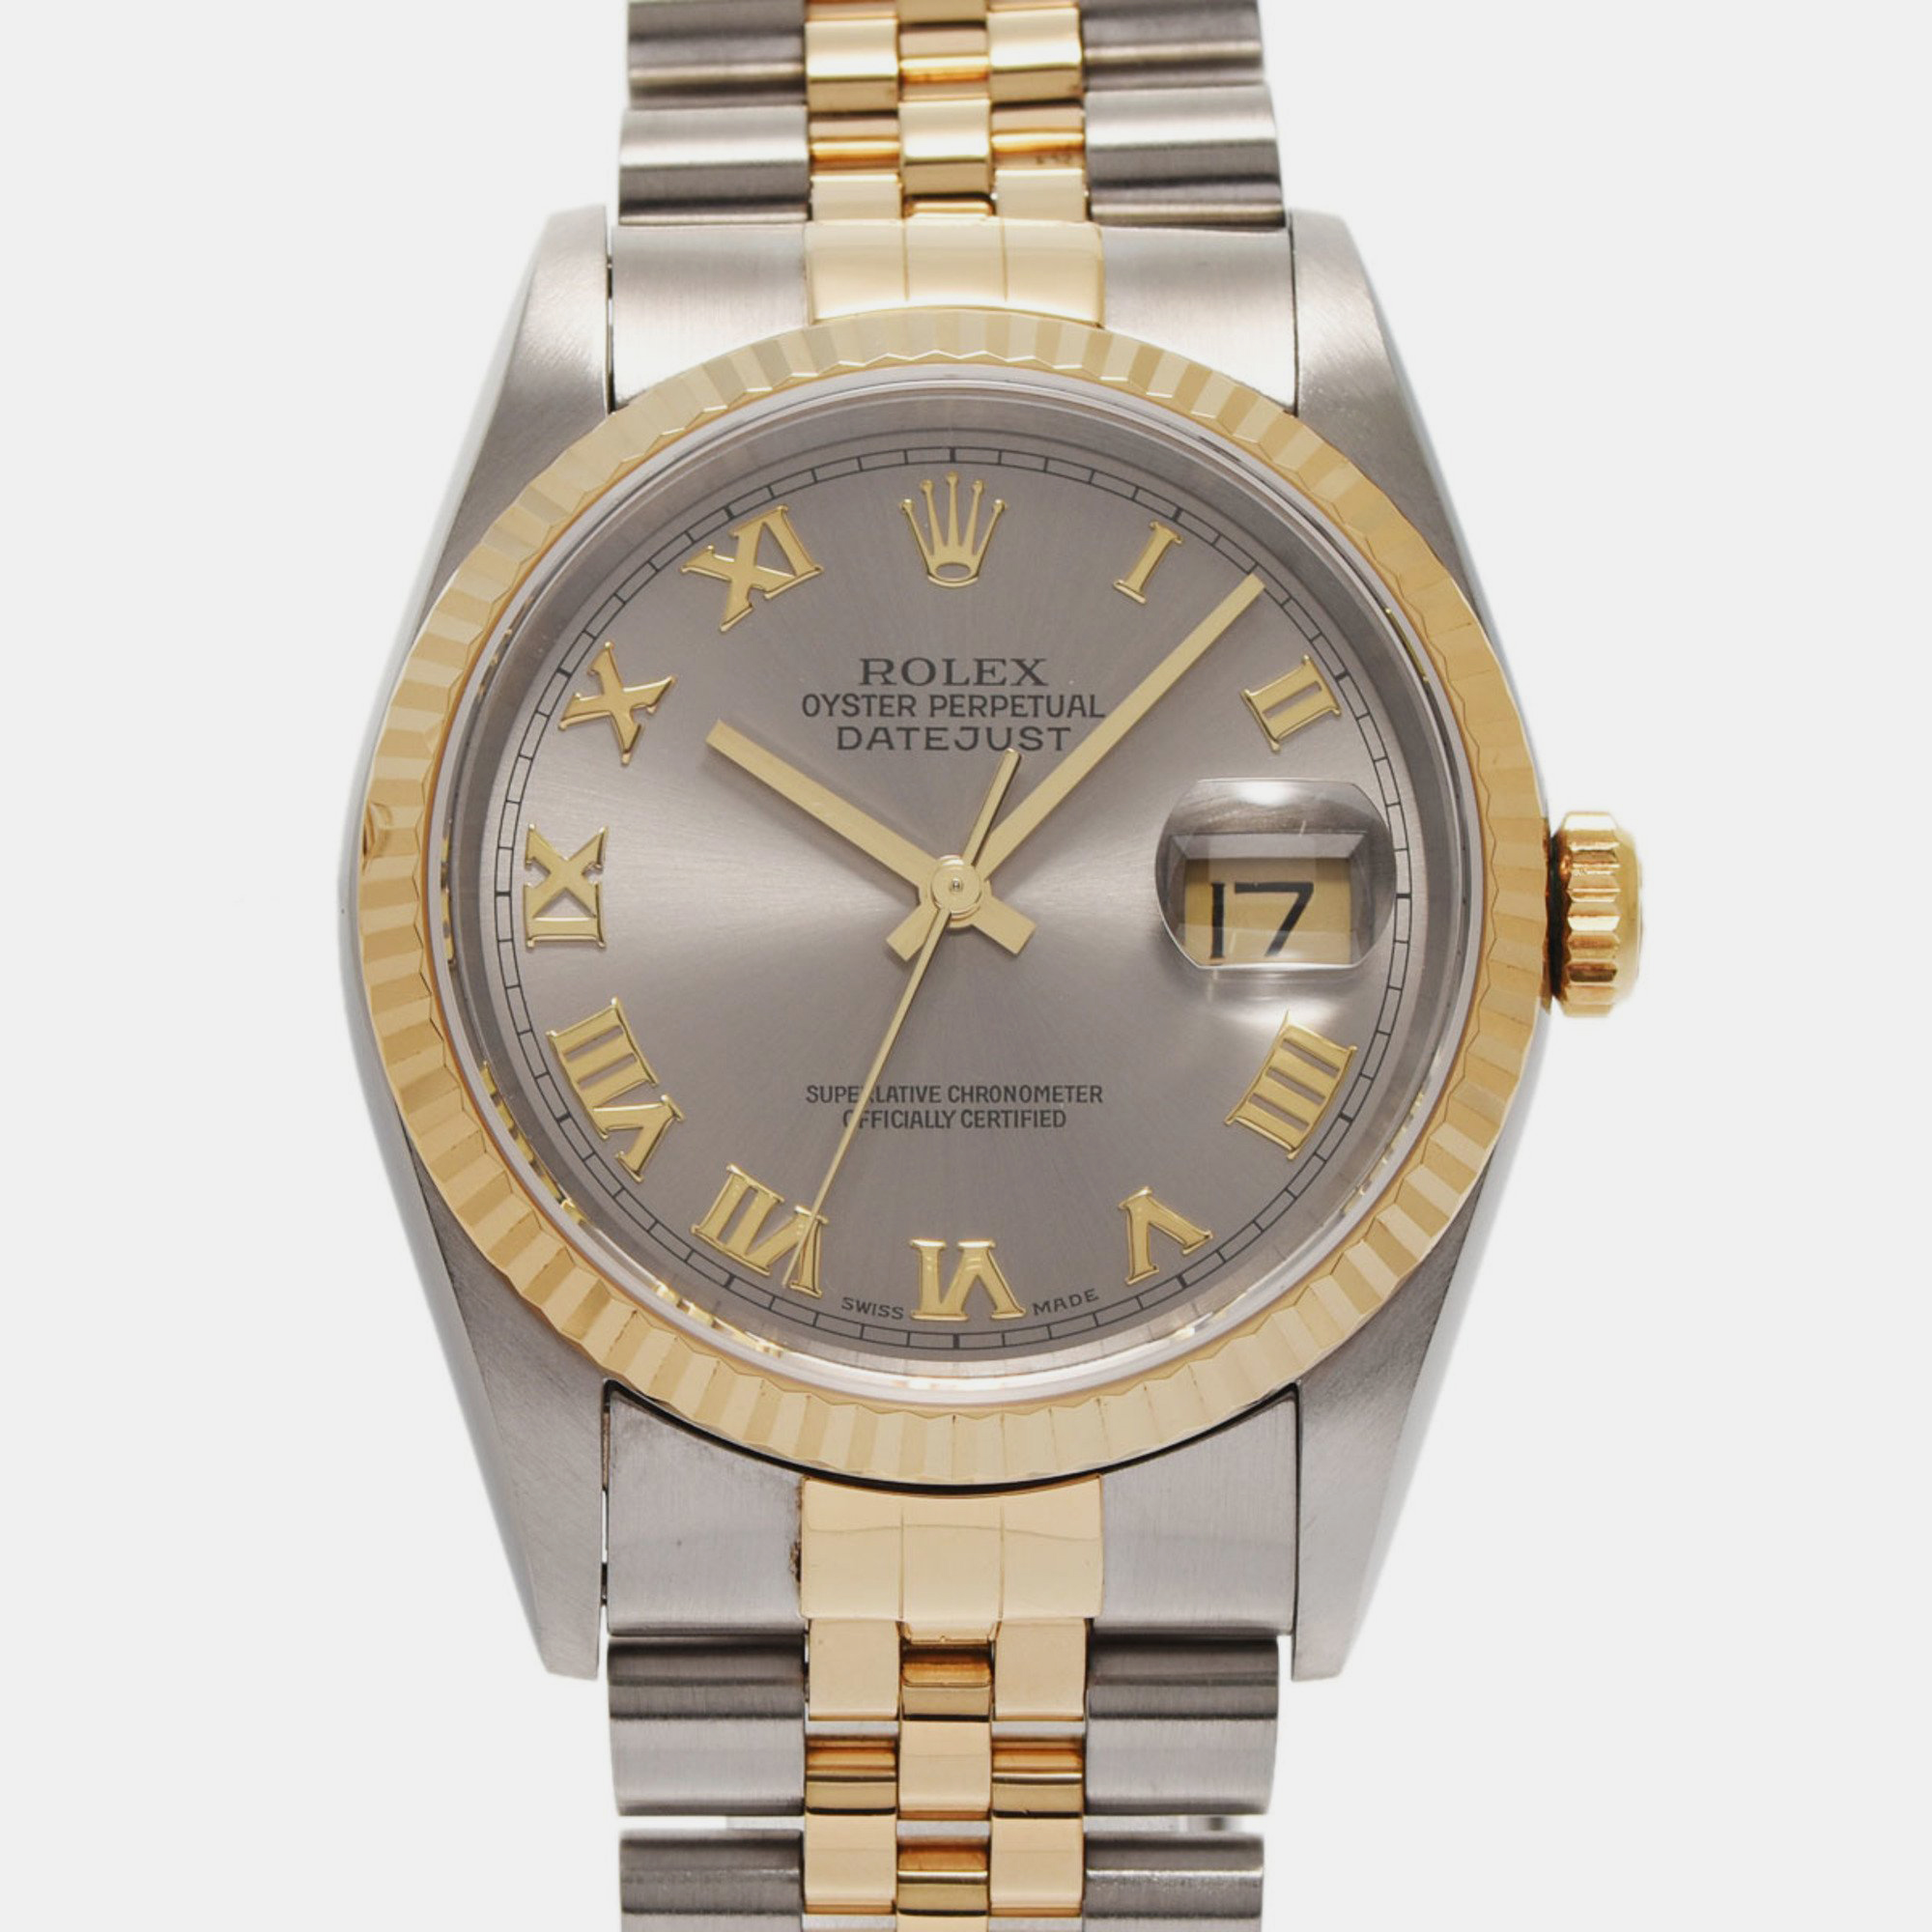 Rolex grey 18k yellow gold stainless steel datejust 16233 automatic men's wristwatch 36 mm